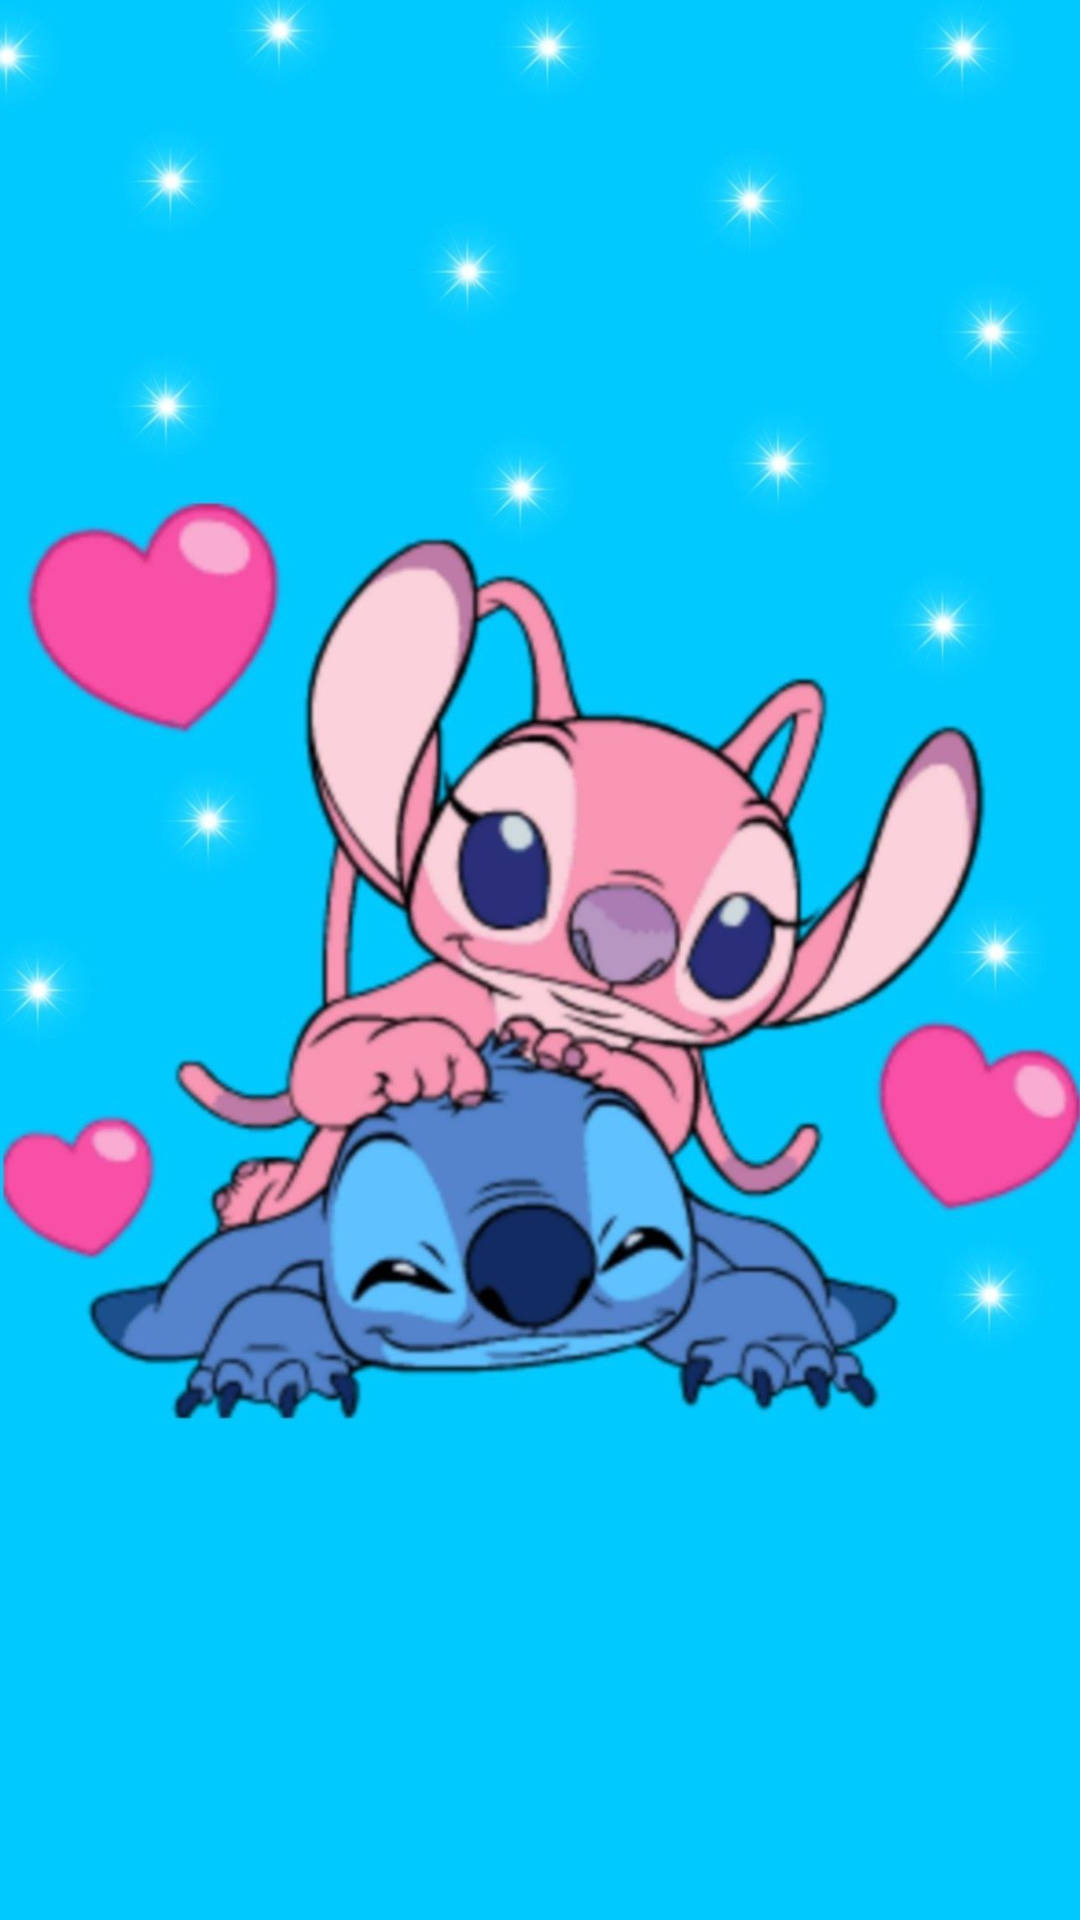 7 Stitch and Angel aesthetic ideas  stitch and angel stitch drawing  cute disney drawings